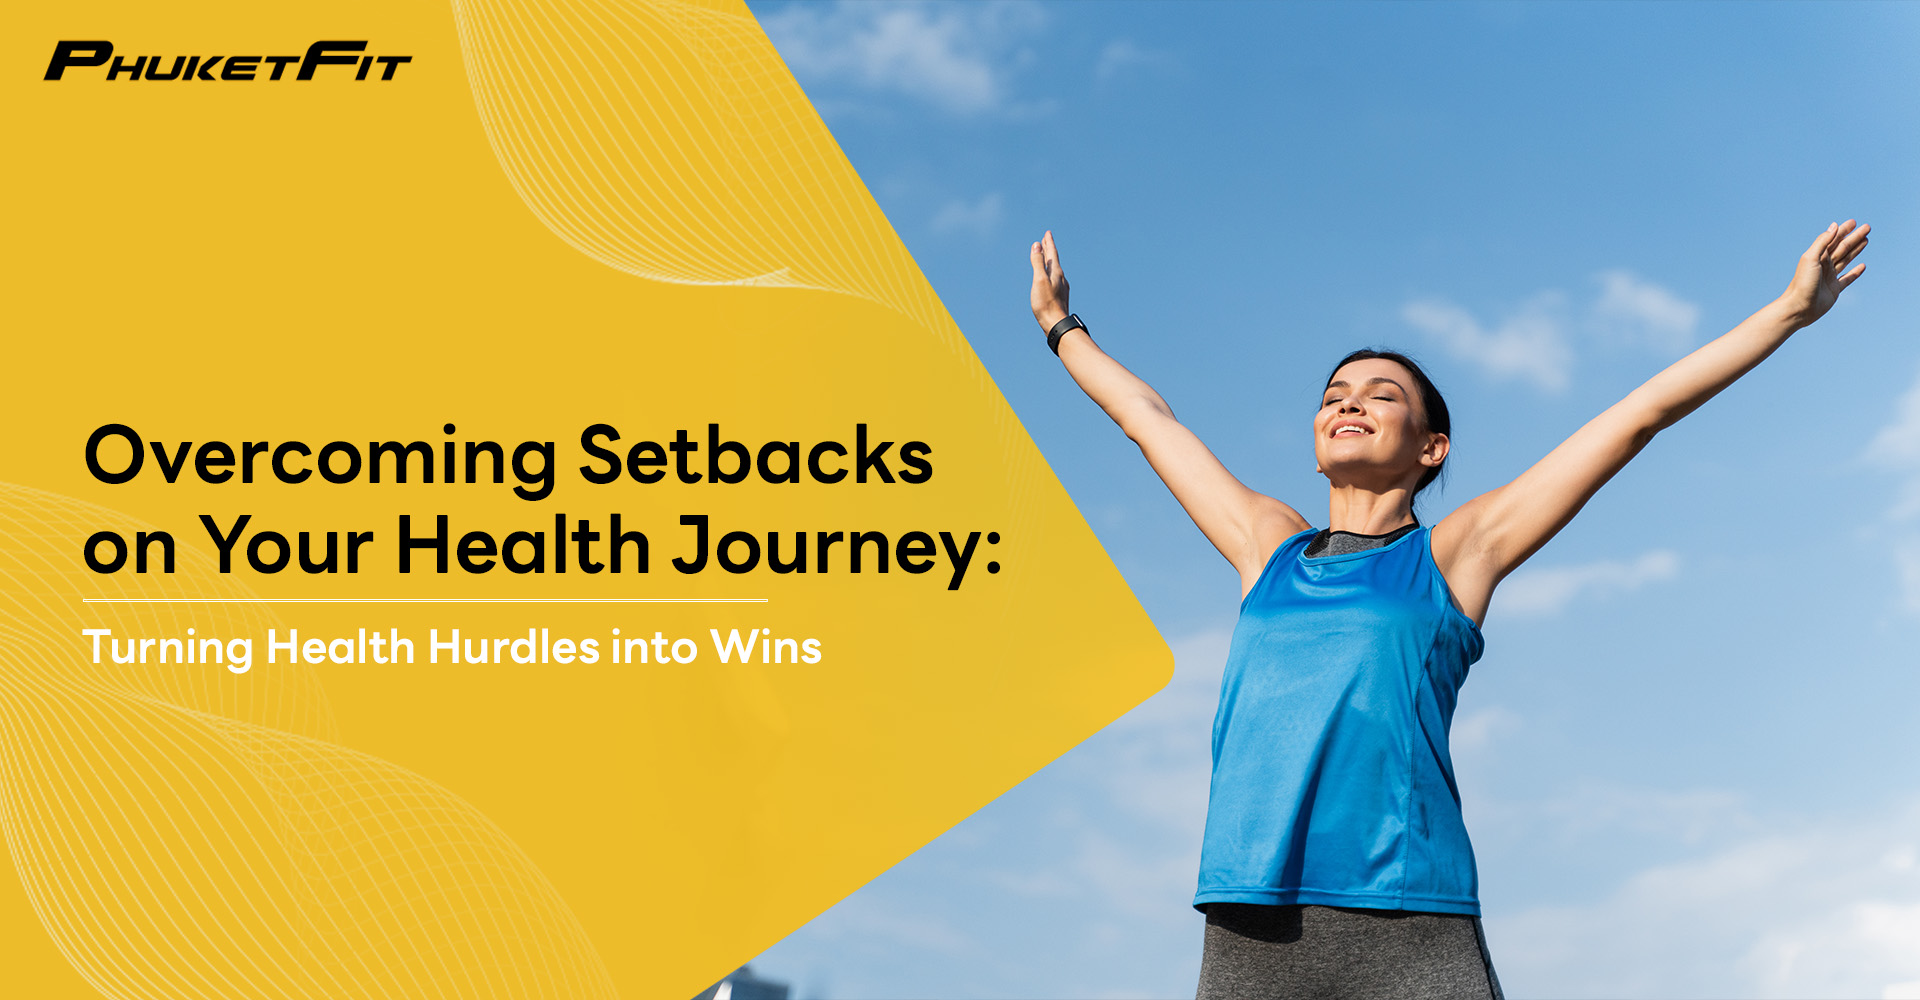 Overcoming Setbacks on Your Health Journey Turning Health Hurdles into Wins